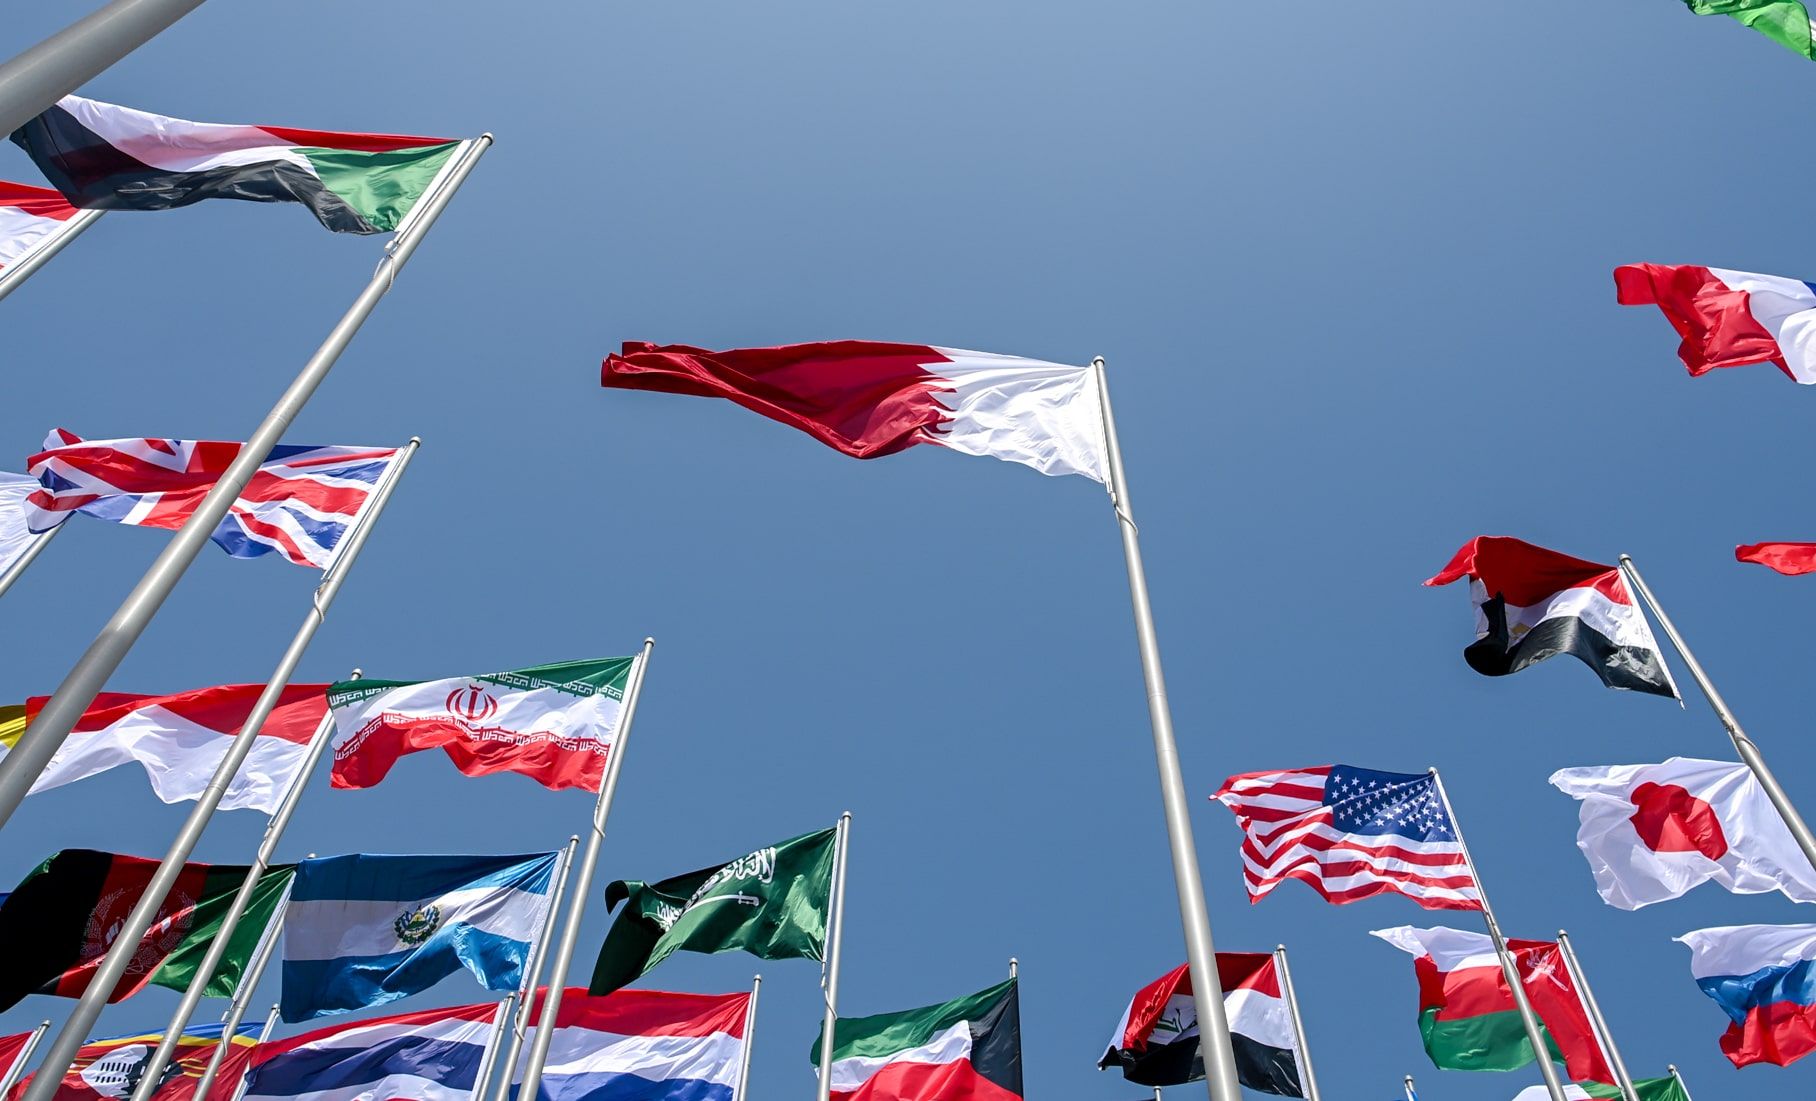 Over twenty international flags flying on flagpoles, seen from below against a blue sky with the Qatari flag at the centre. 